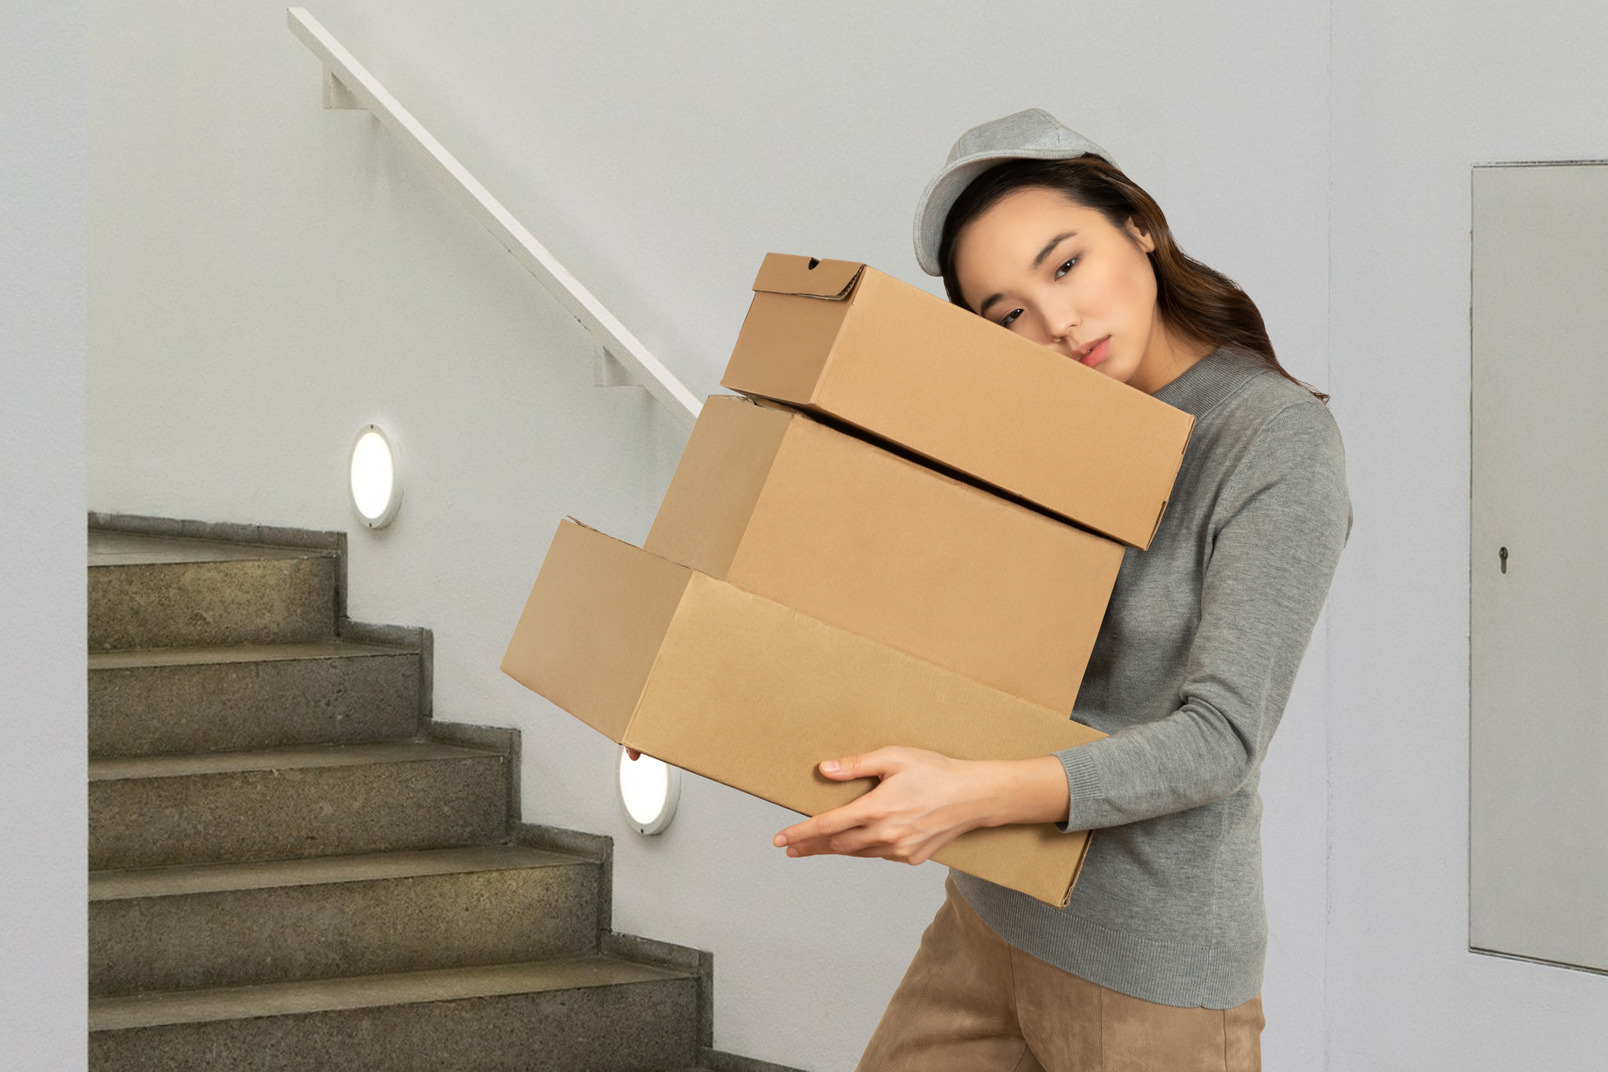 A young woman moving into a new home